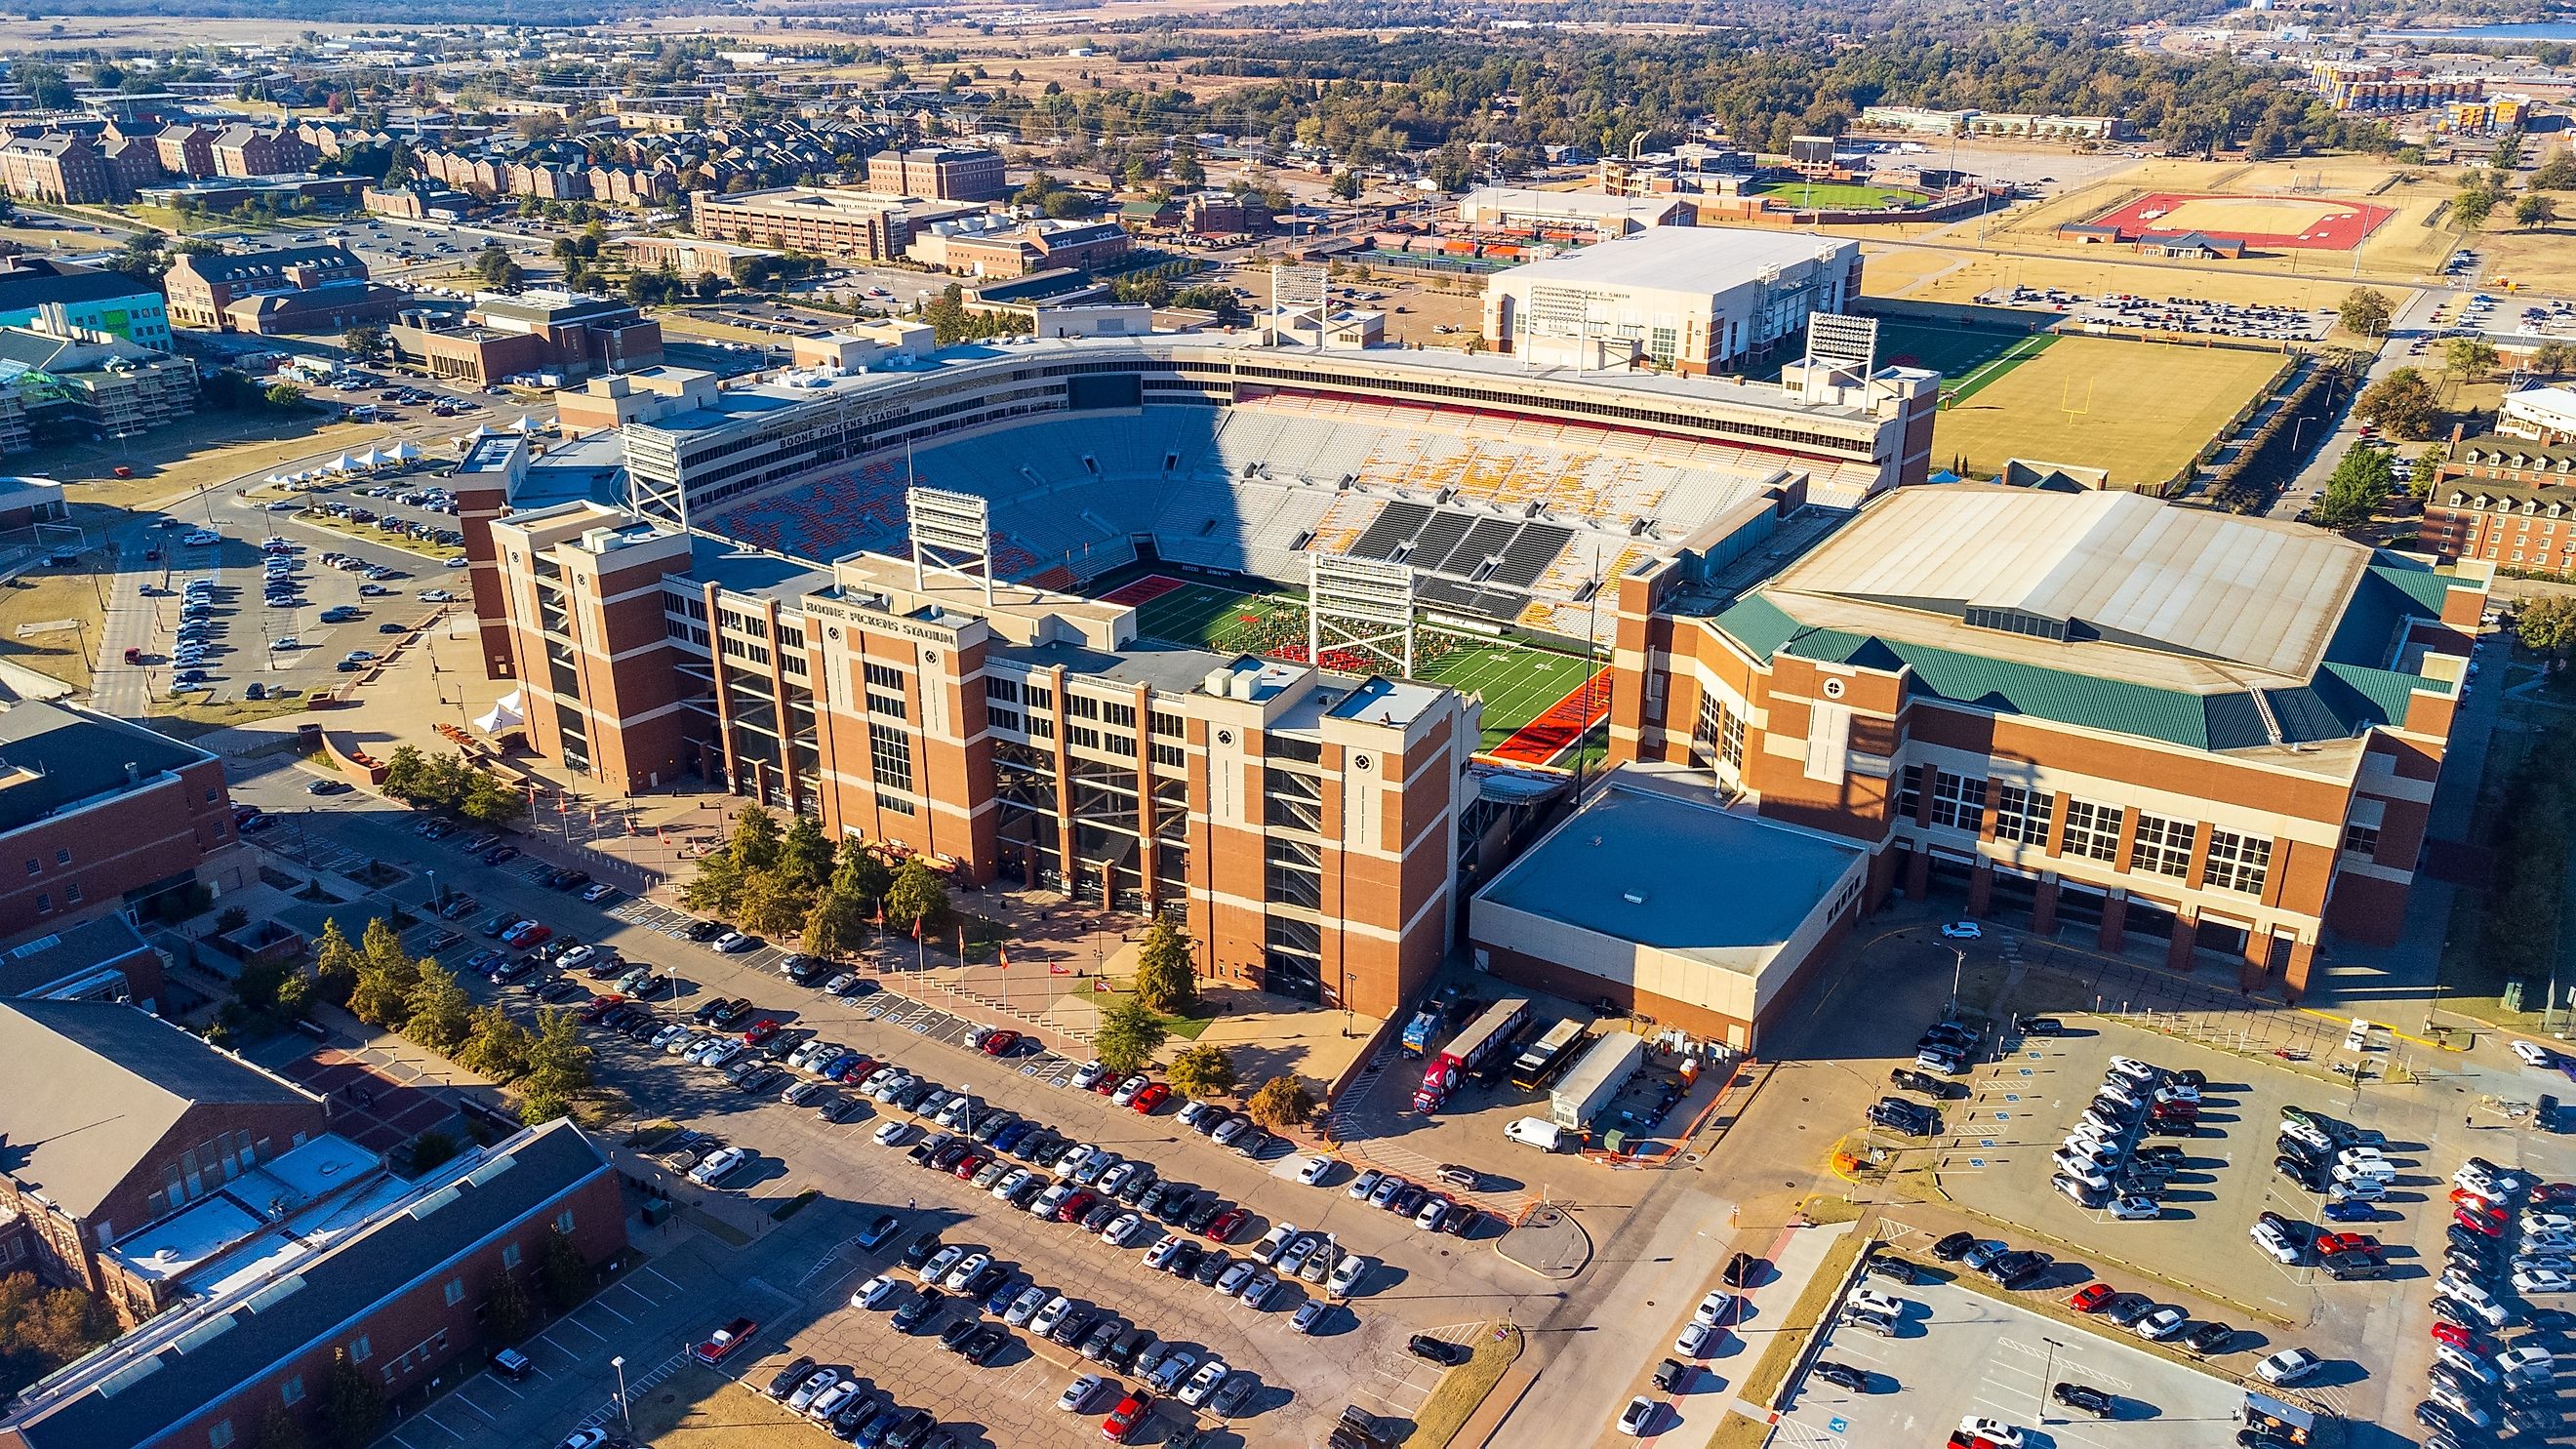 Aerial view of Boone Pickens Stadium in the town of Stillwater, Oklahoma. Editorial credit: Chad Robertson Media / Shutterstock.com